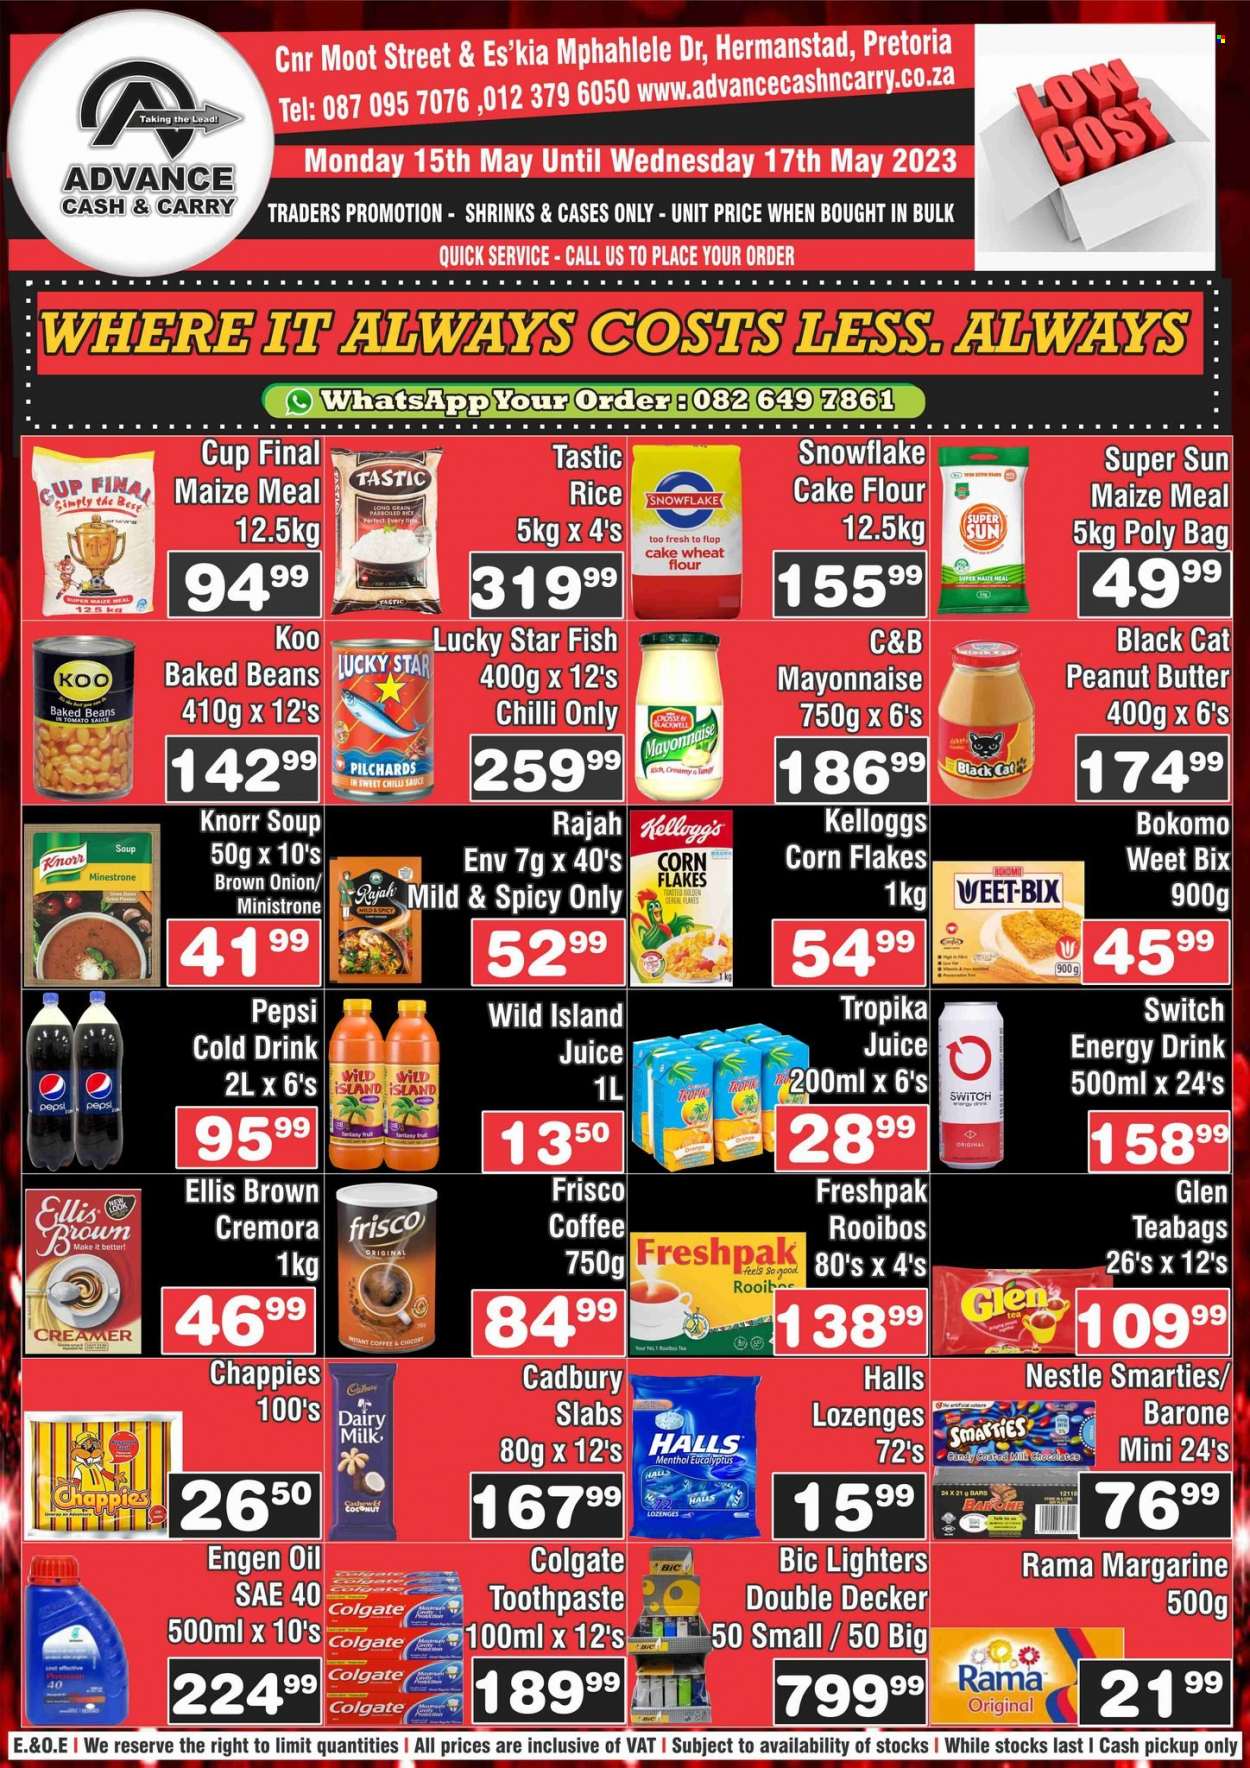 ADVANCE CASH & CARRY specials • Where it always costs less. always ...